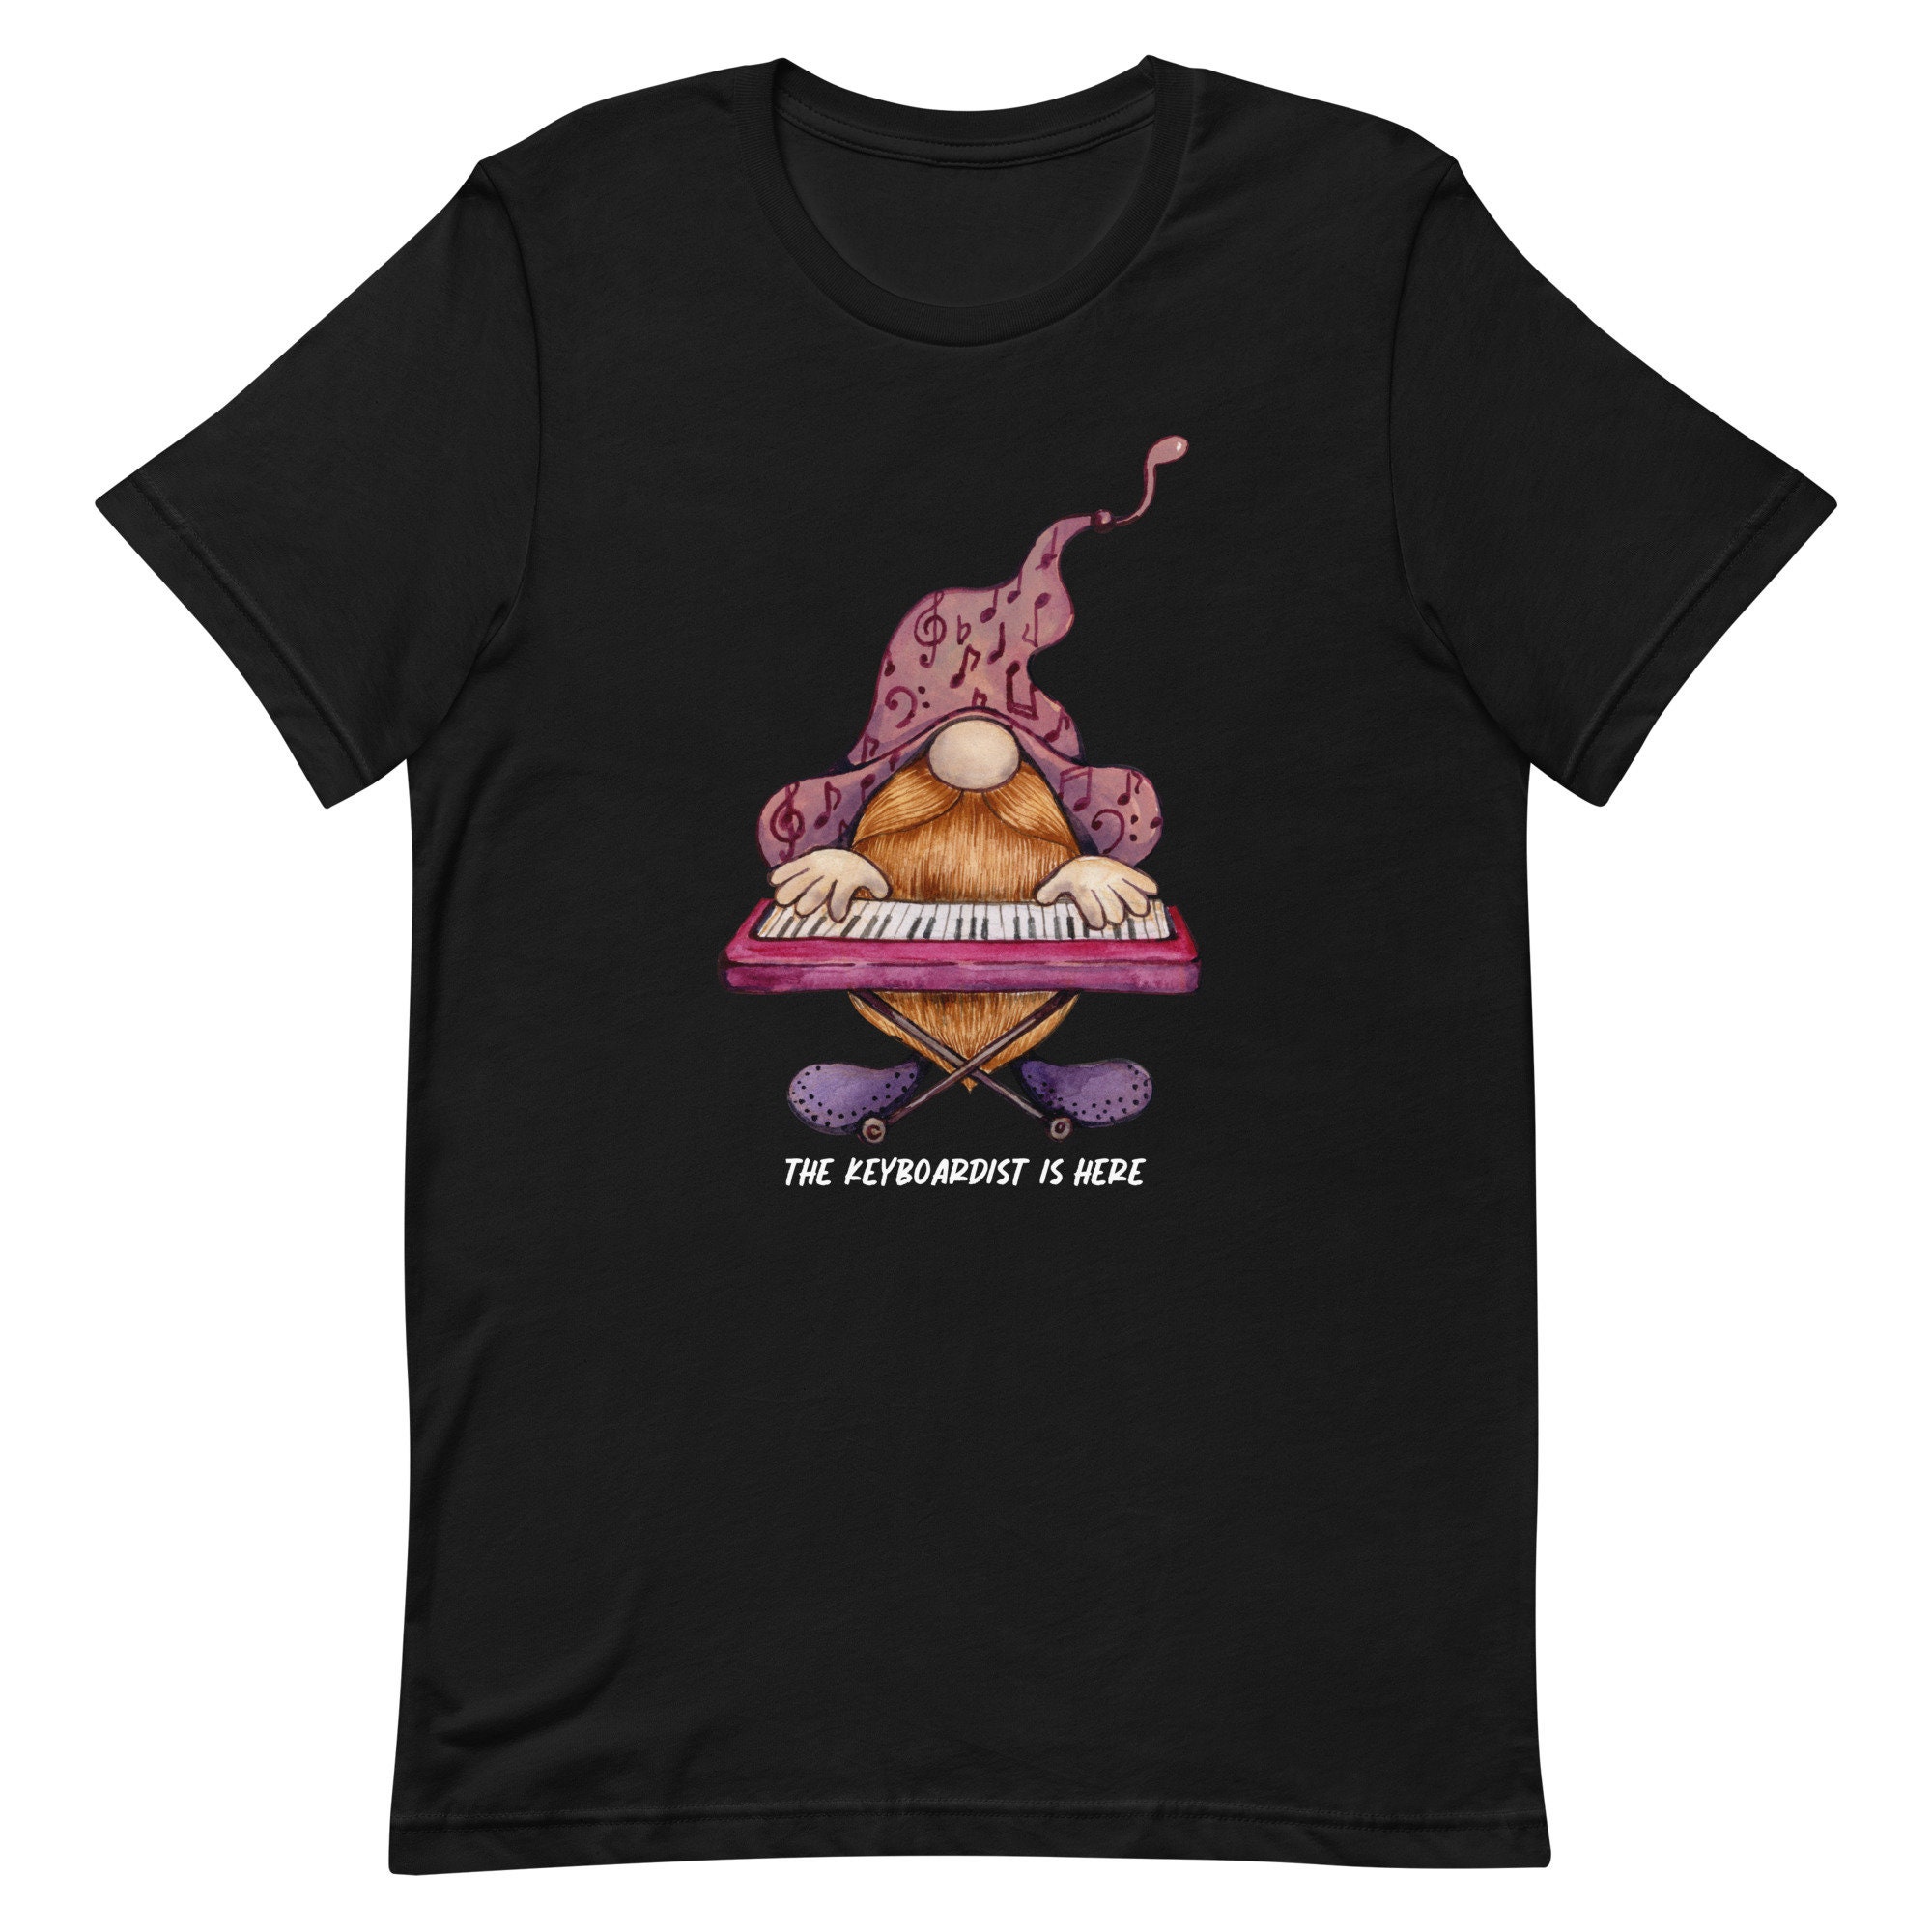 The Keyboardist is Here Unisex T-shirt/musicians/music - Etsy